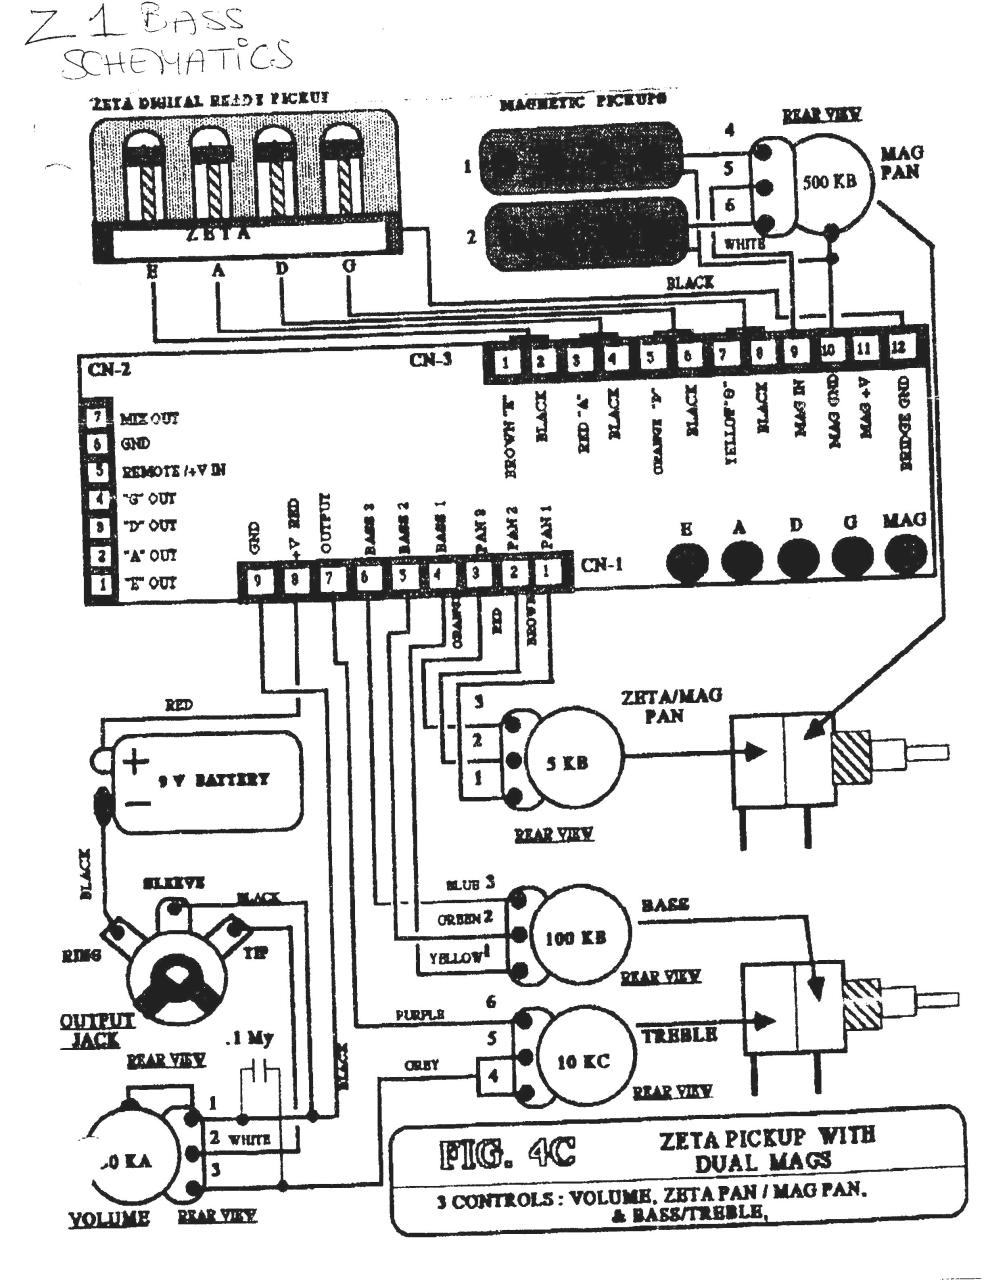 Wiring Diagram For 350 Chevy Engine